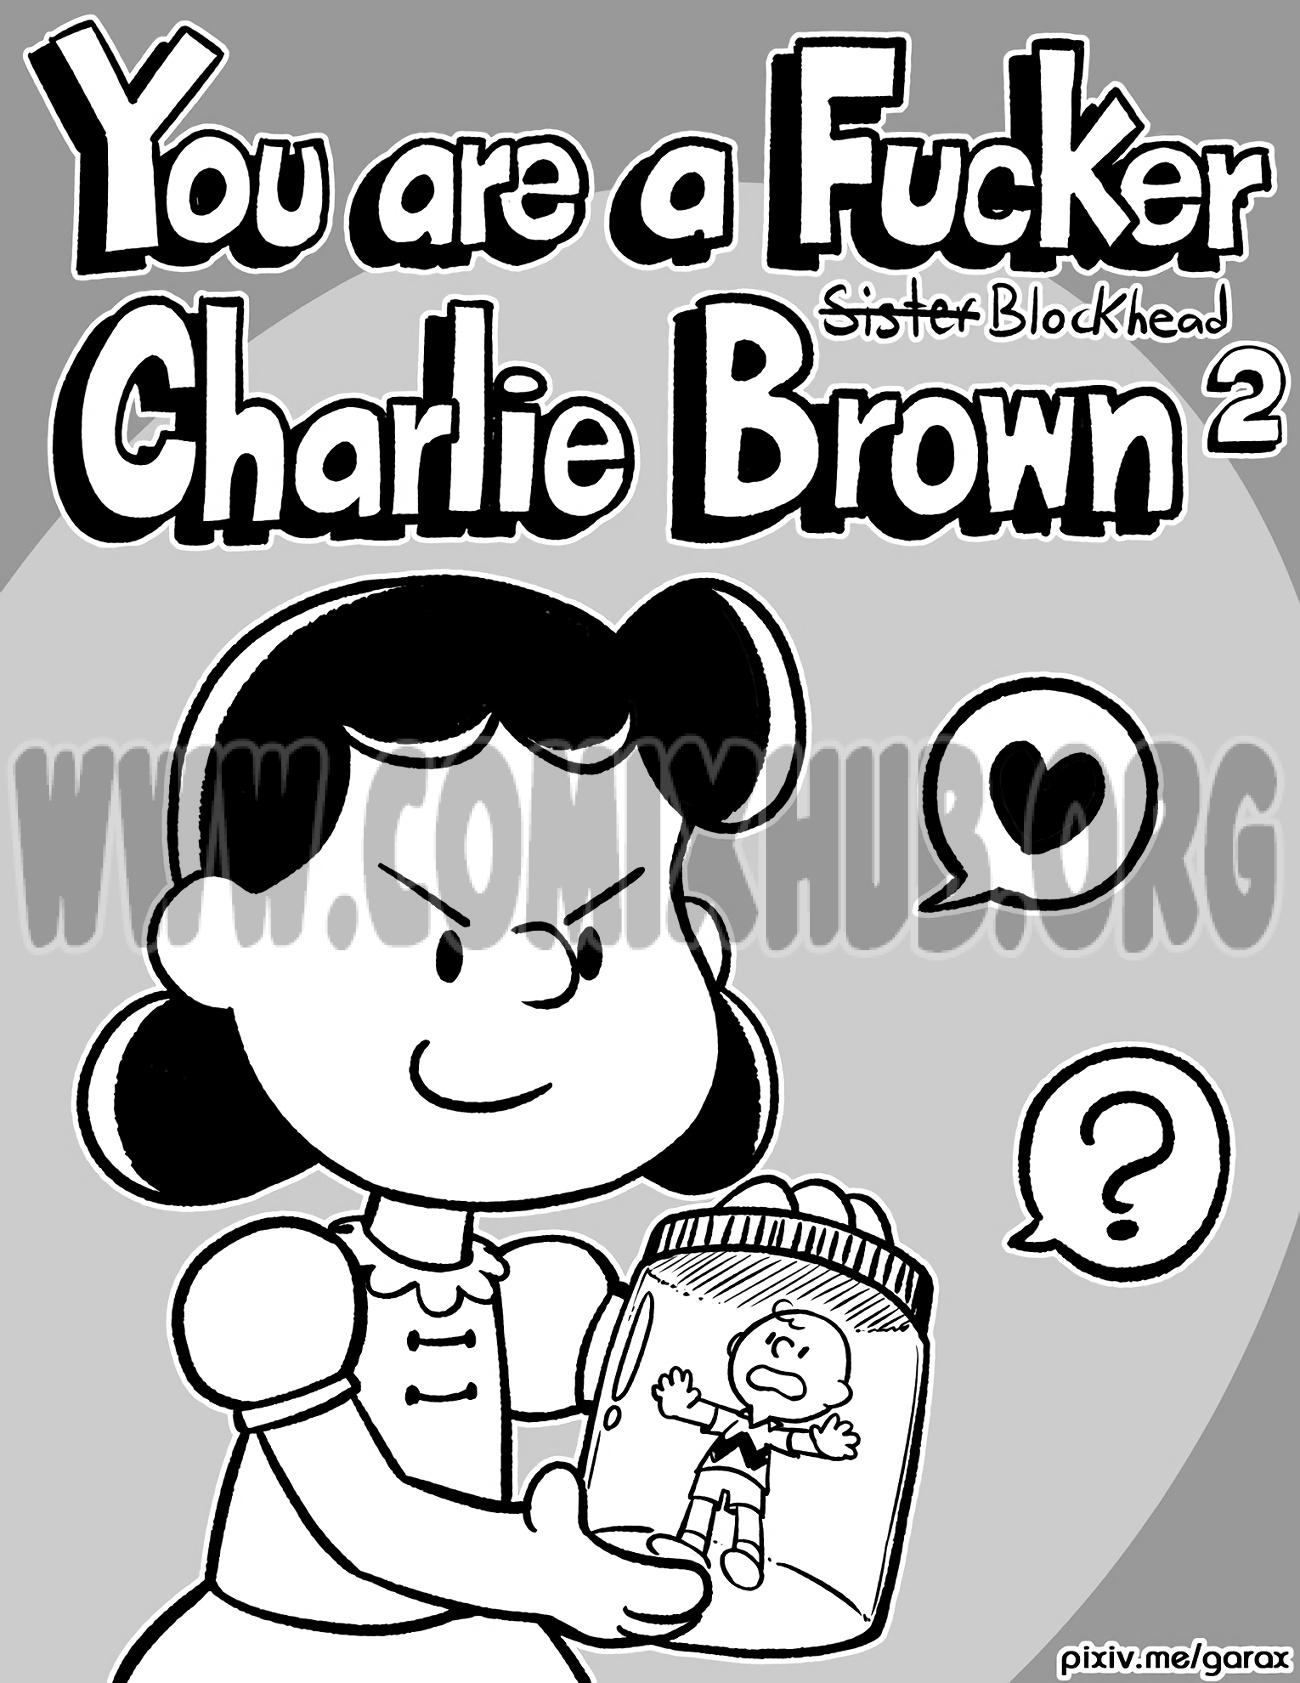 You are a Fucker, Charlie Brown 2 Anal Sex, Creampie, Lolicon, Straight, Straight Shota, Virgin